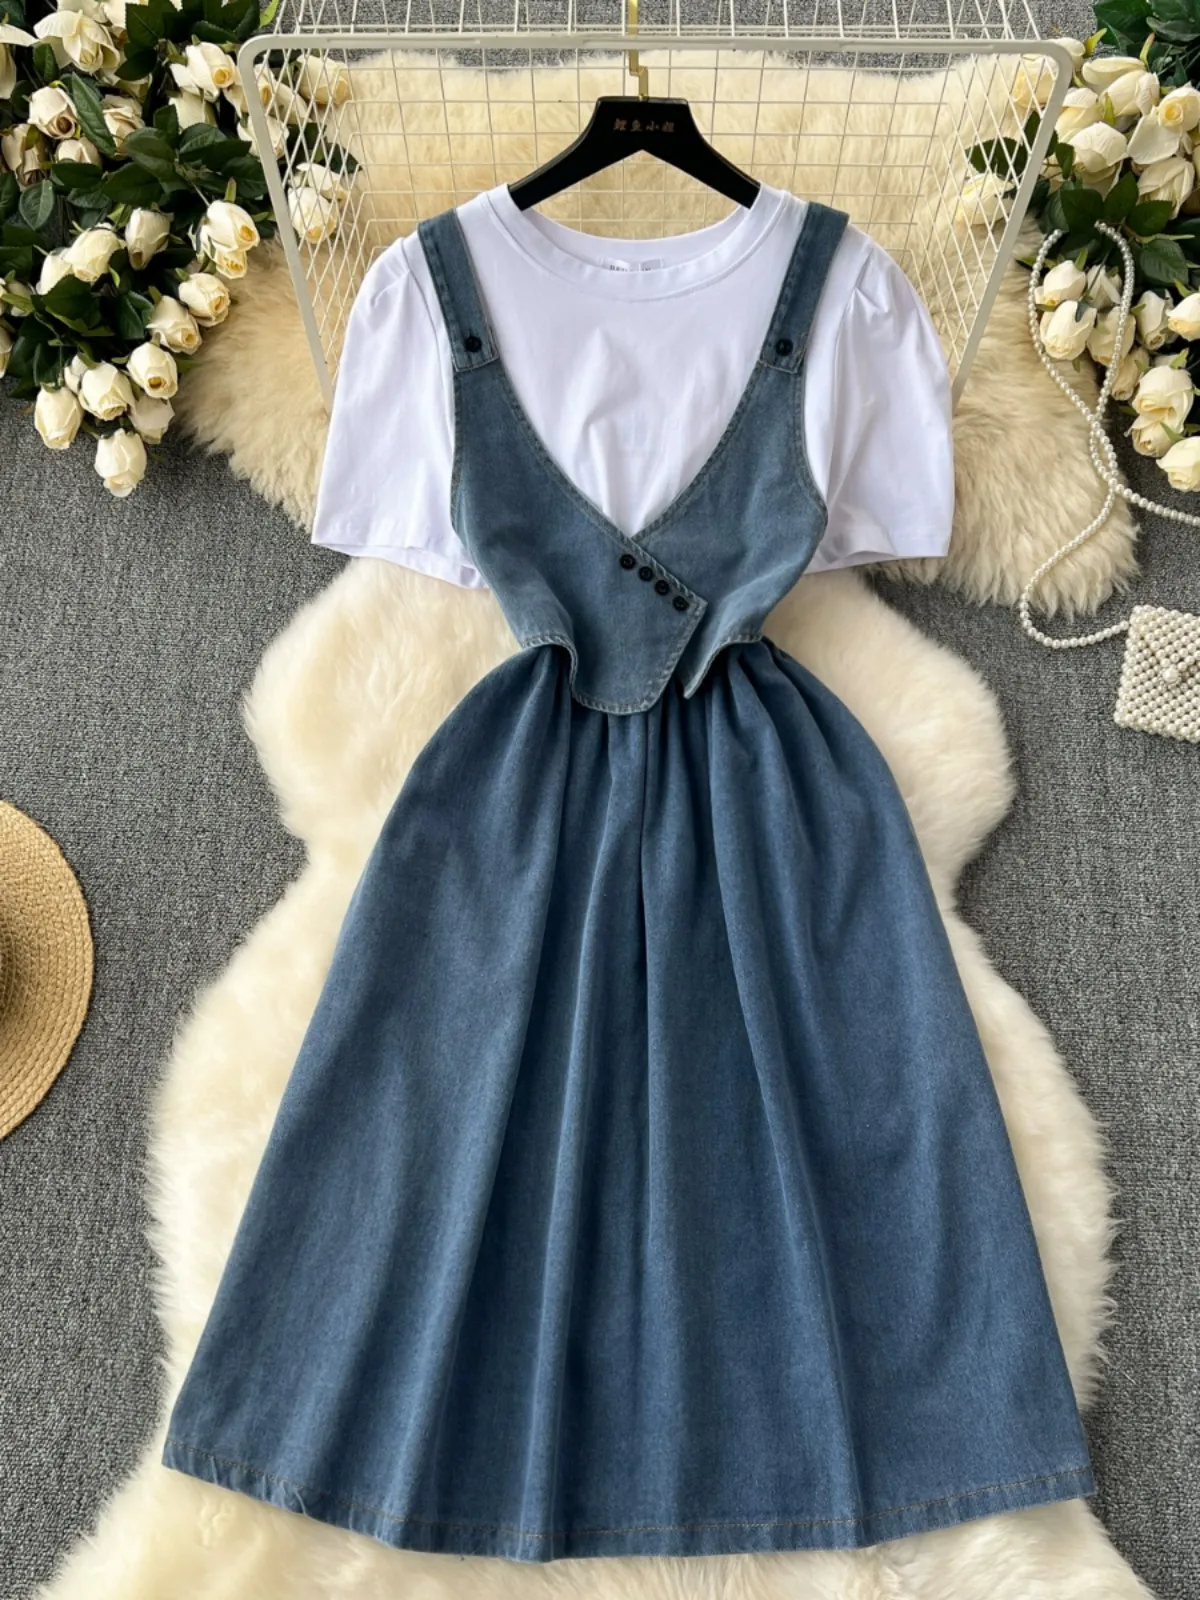 Korean style sweet and fake two-piece dress for women with a sense of niche design. Round neck bubble sleeve patchwork waist cinched denim skirt long skirt